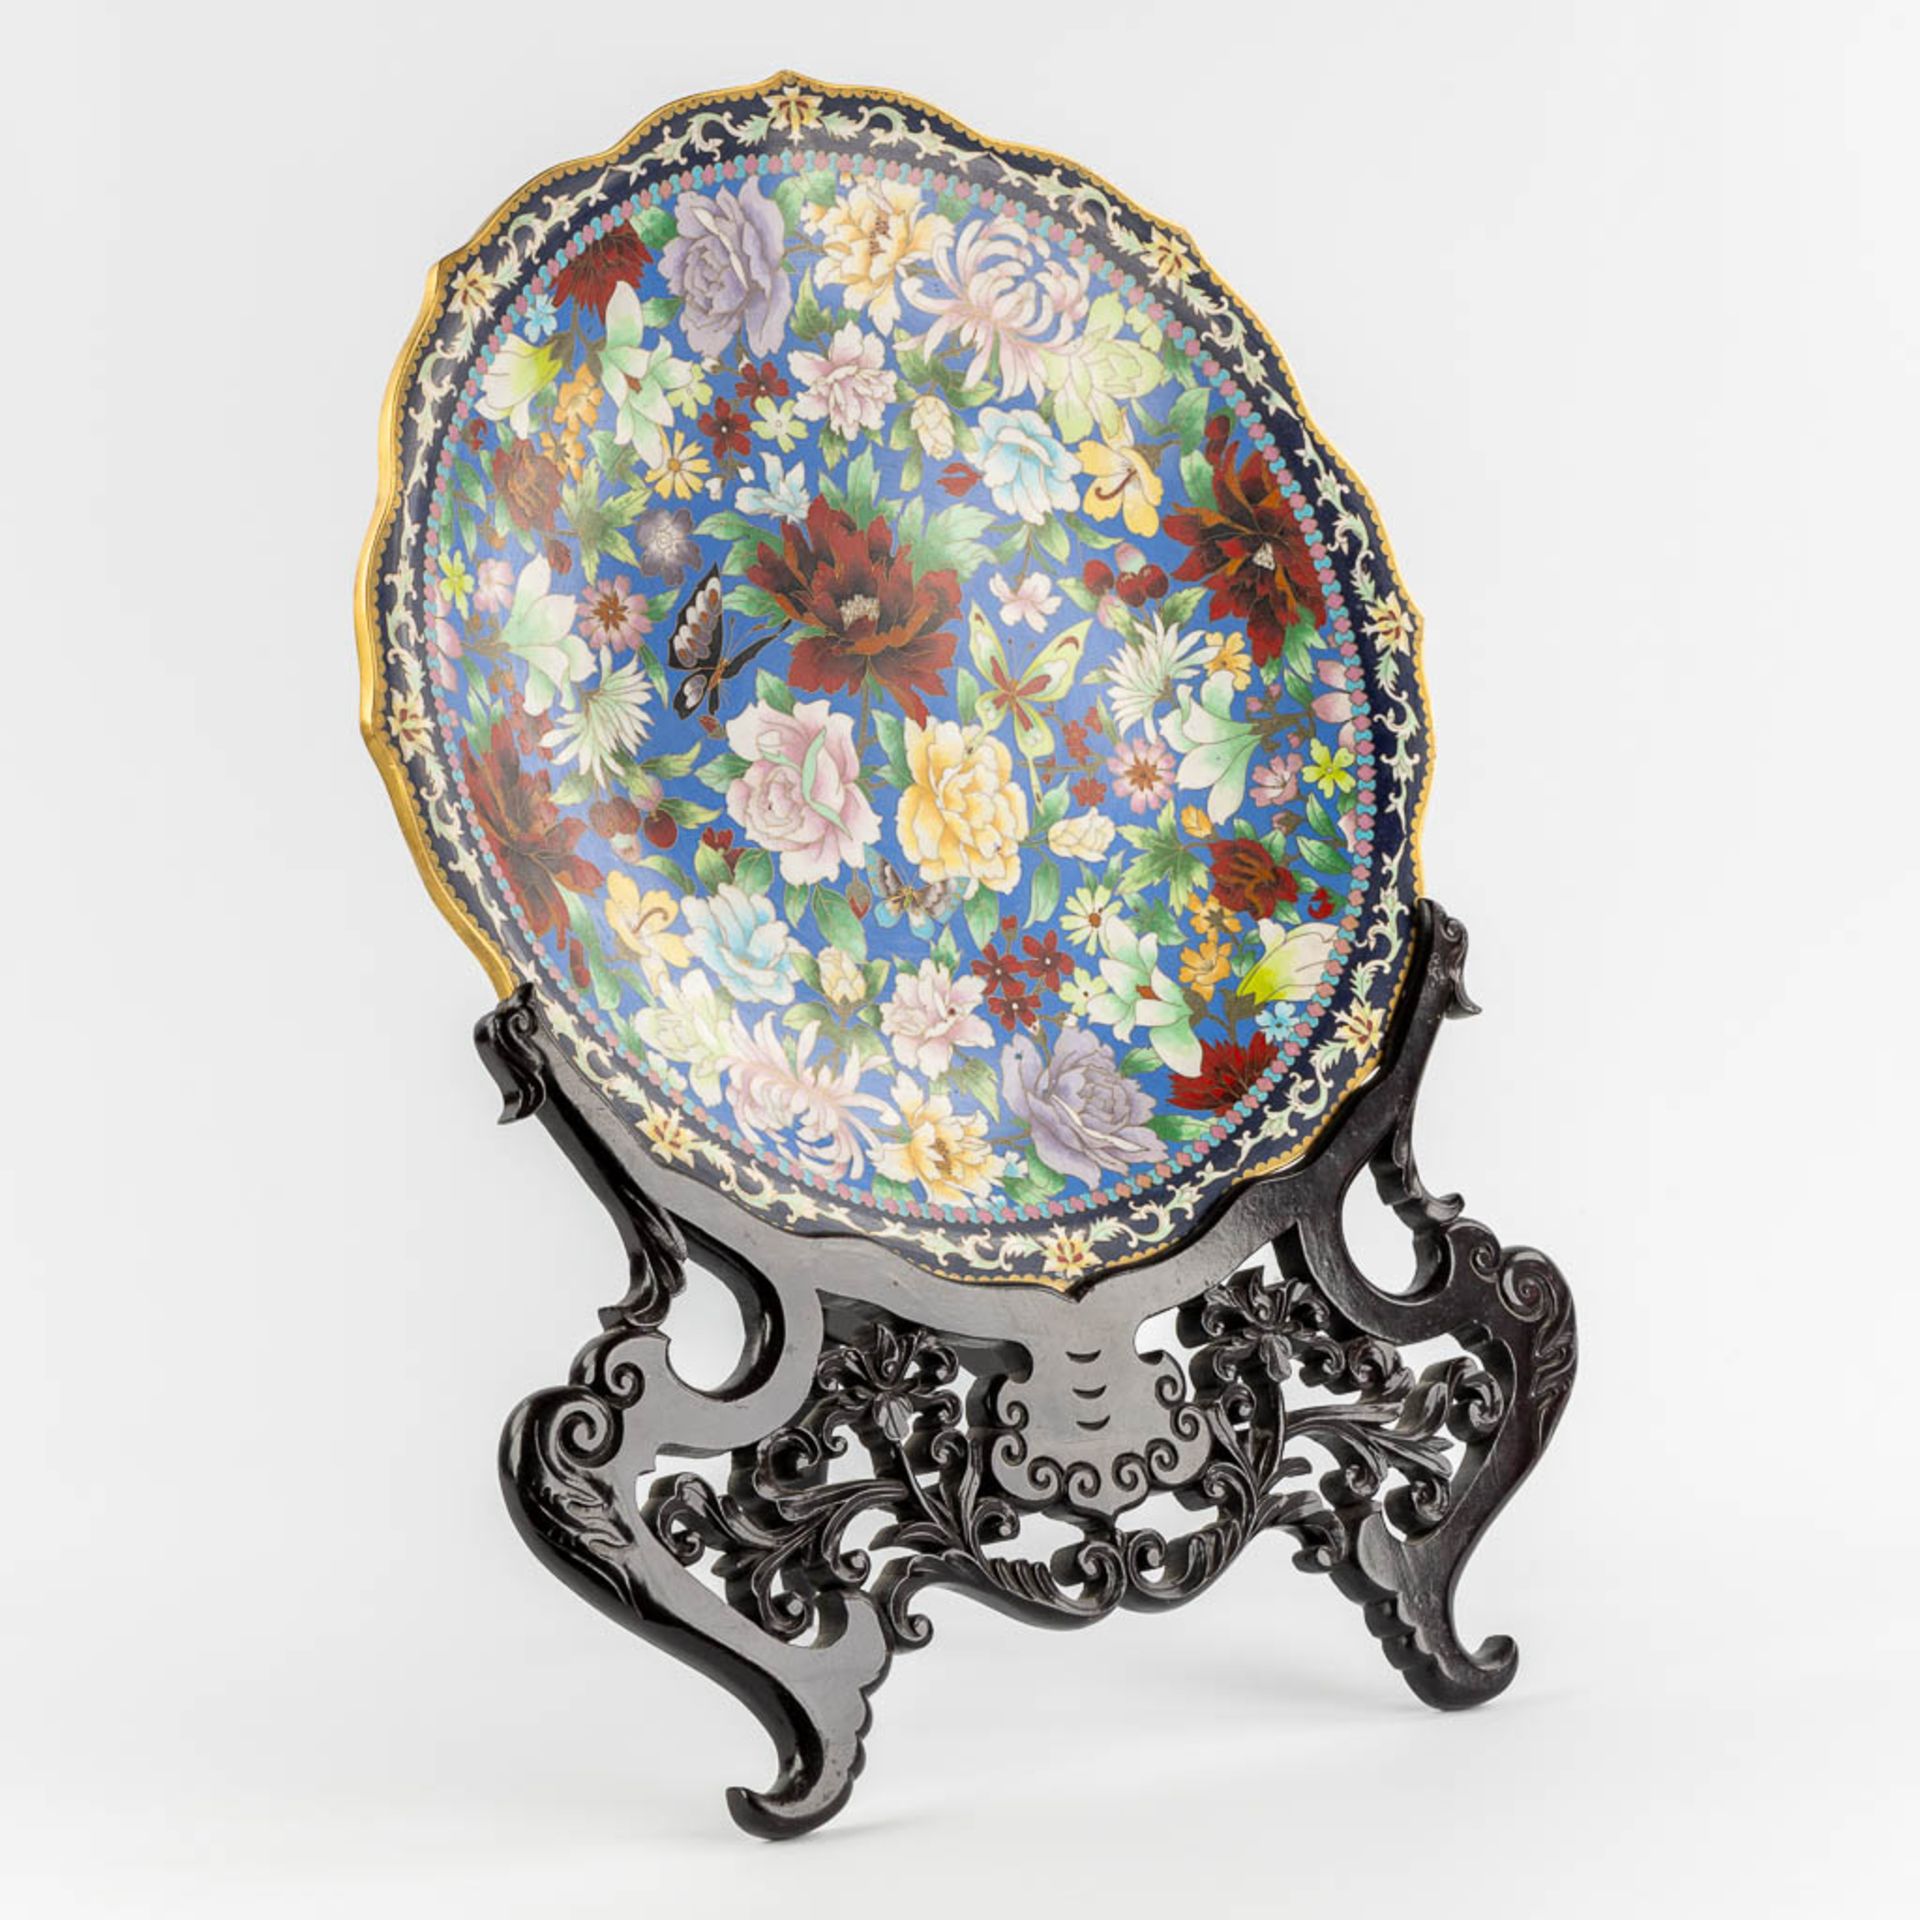 A large Chinese Cloisonné plate in an openworked sculptured wood stand. (W:51 x H:67 cm) - Image 3 of 12